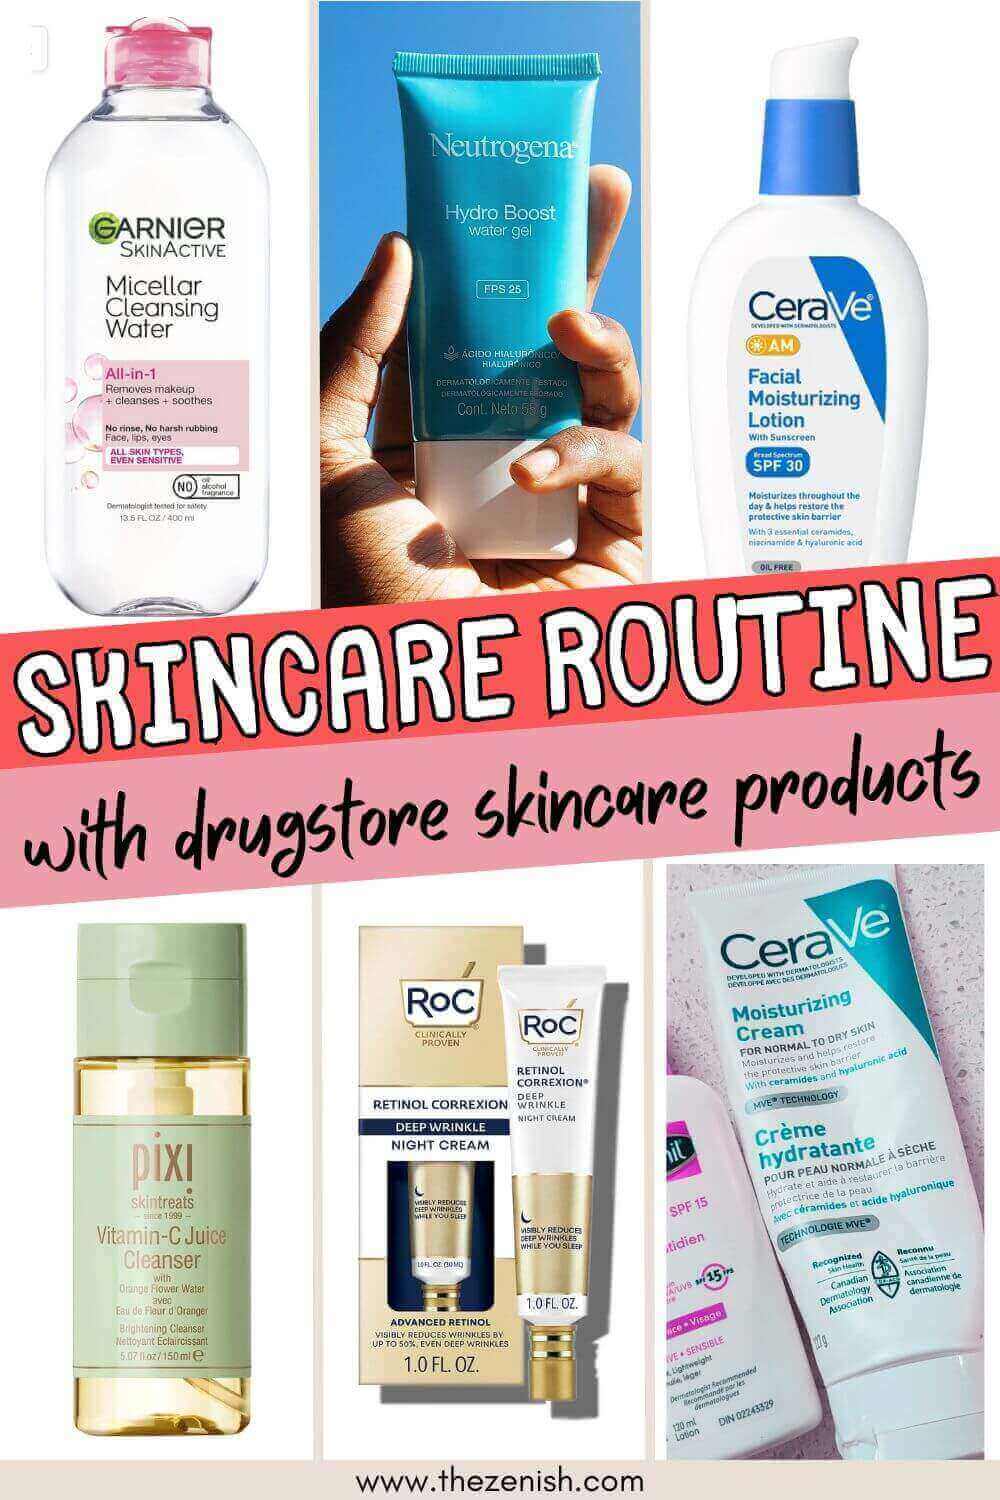 A Simple Drugstore Skincare Routine for Gorgeous Skin 10 A Simple Drugstore Skincare Routine for Gorgeous Skin